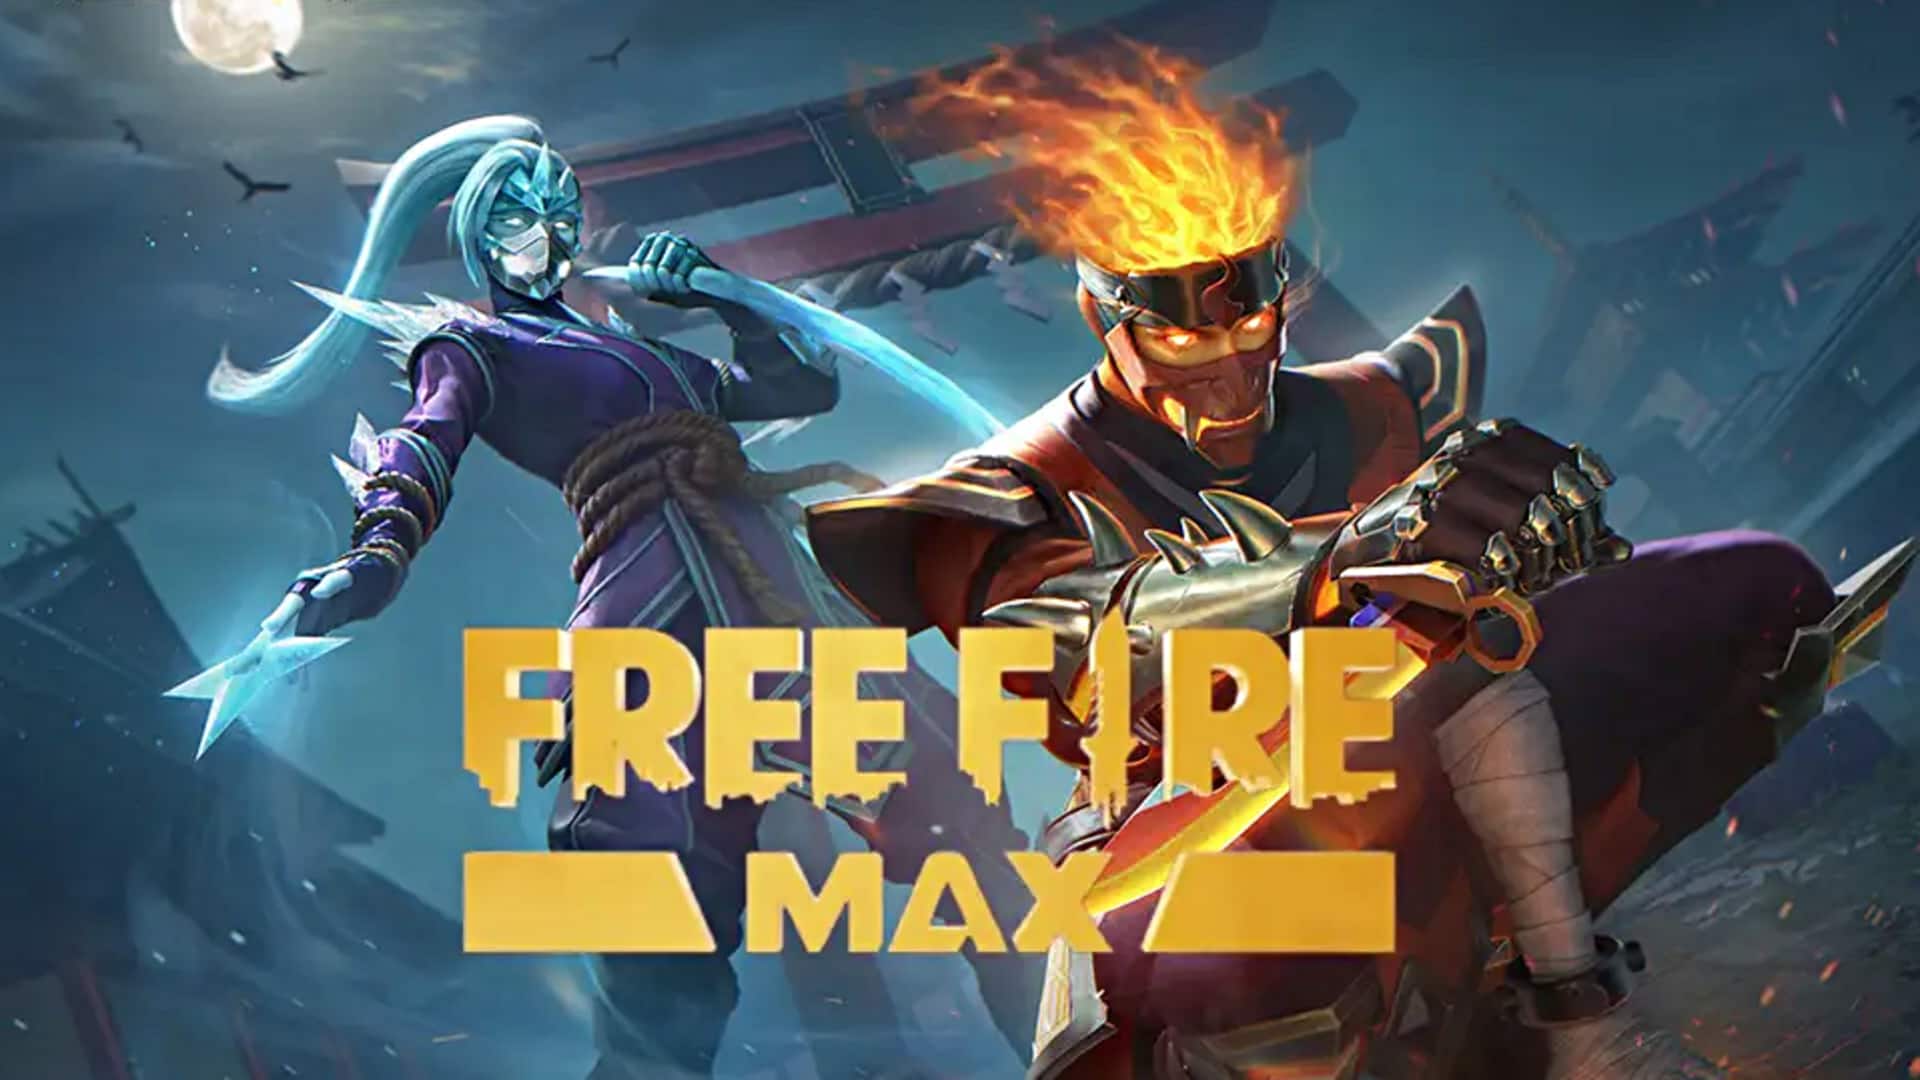 Free Fire MAX codes for January 13: How to redeem